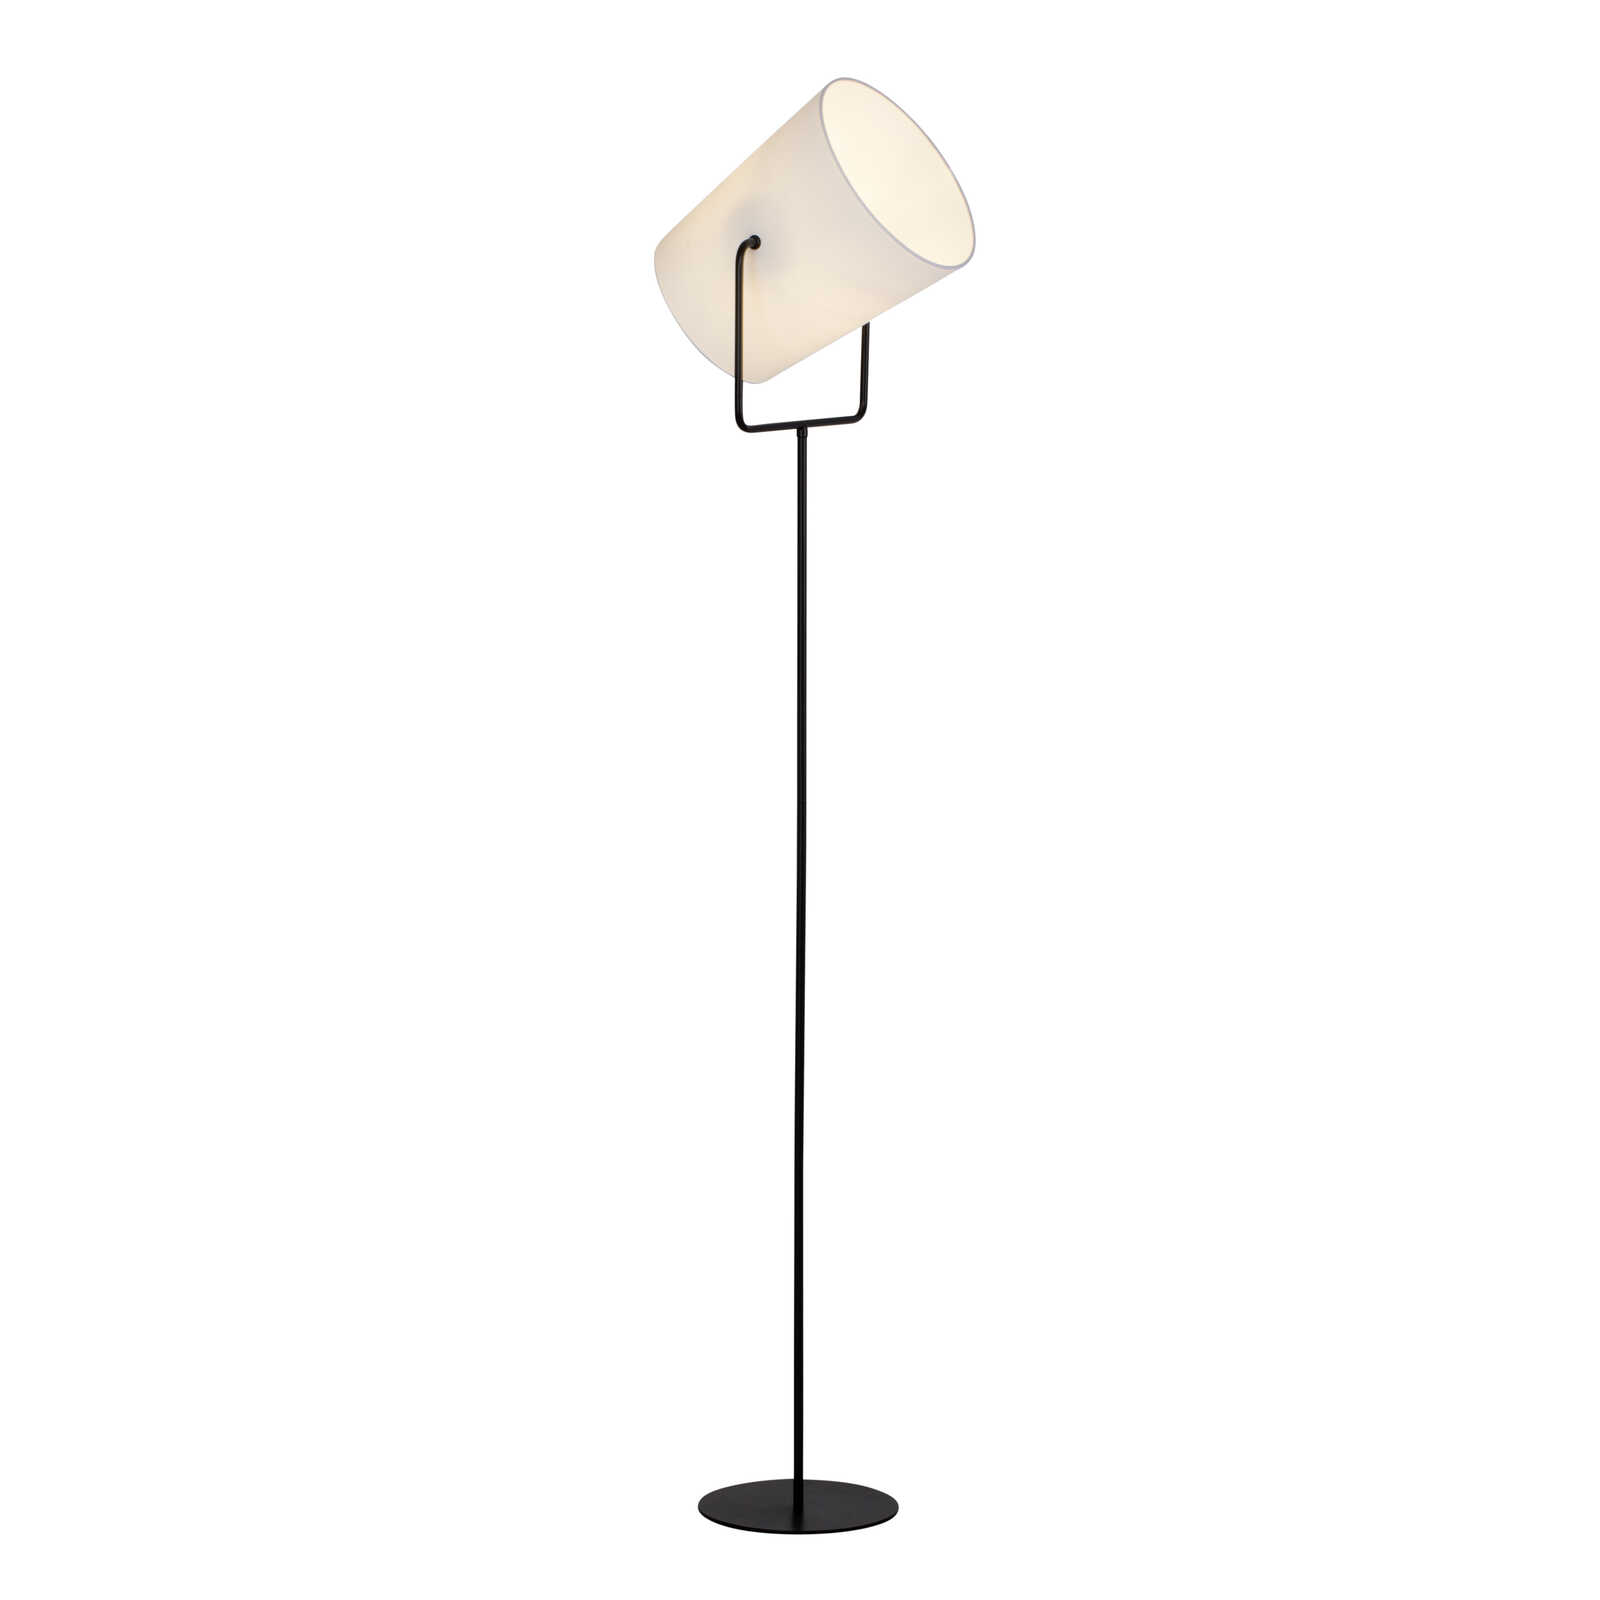             Floor lamp made of textile - Collin - Black
        